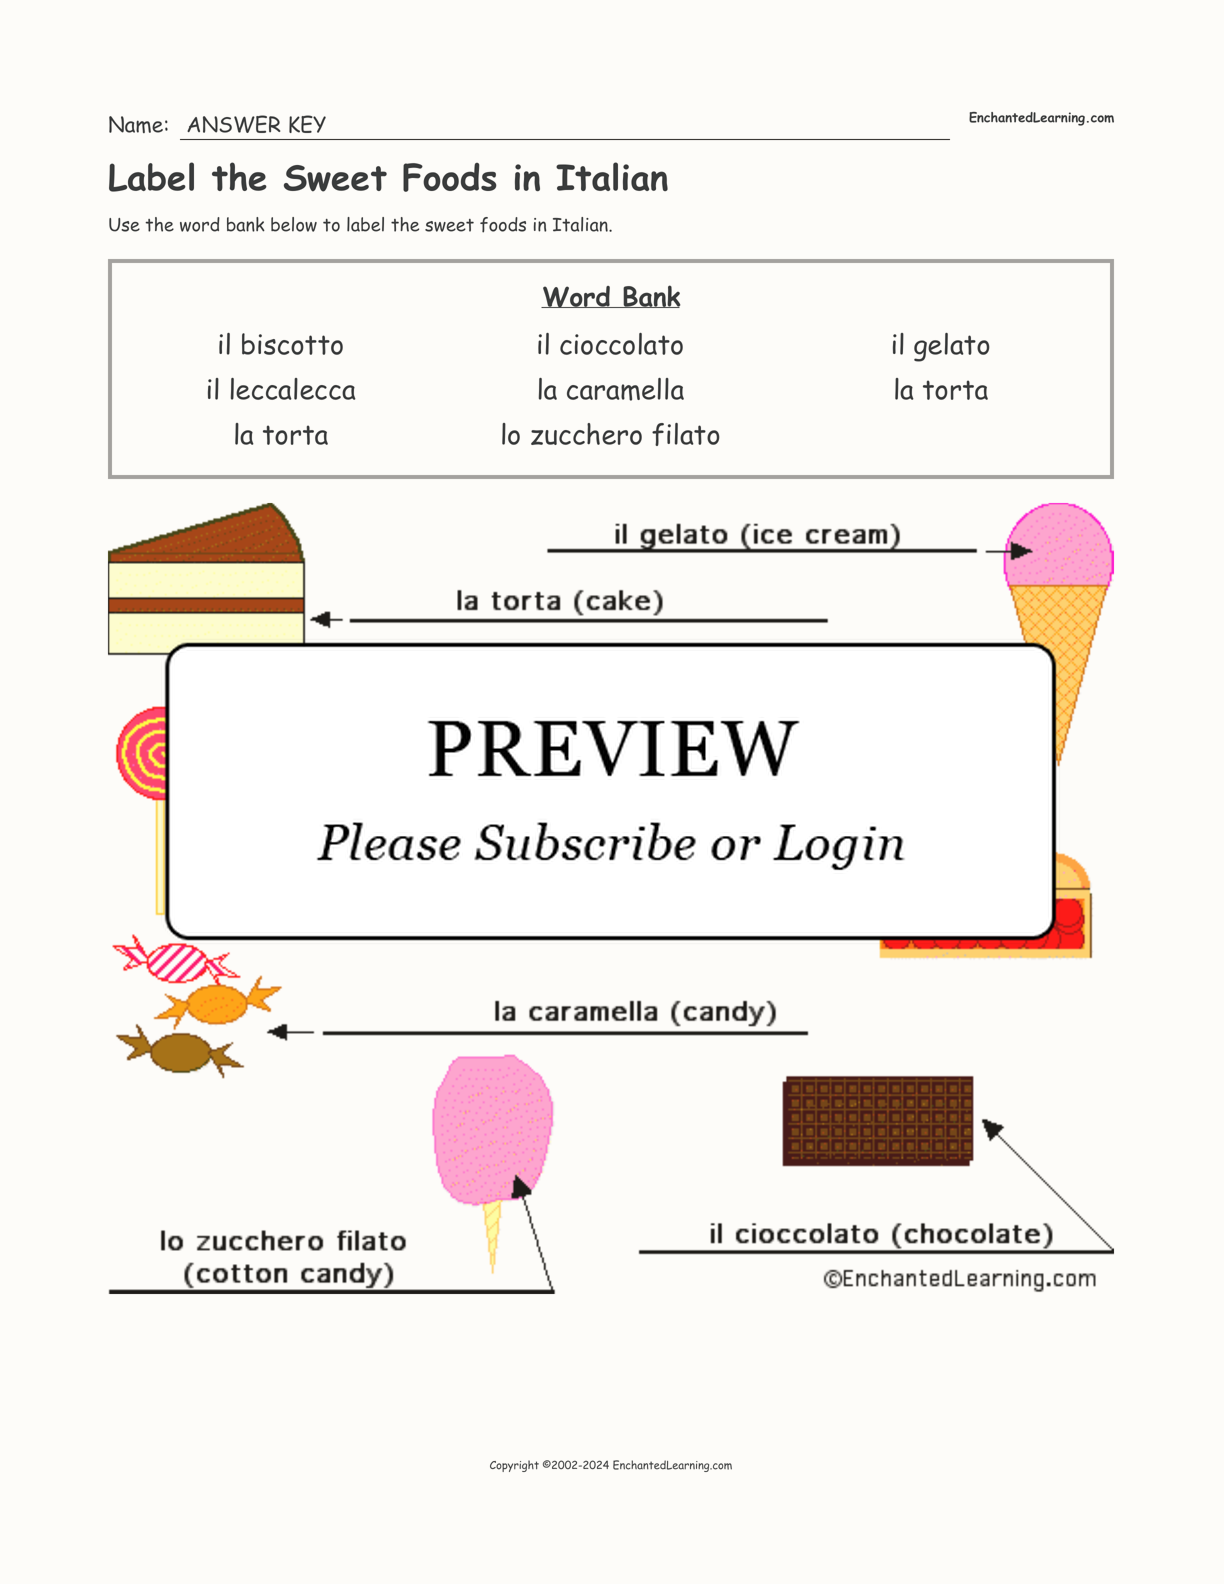 Label the Sweet Foods in Italian interactive worksheet page 2